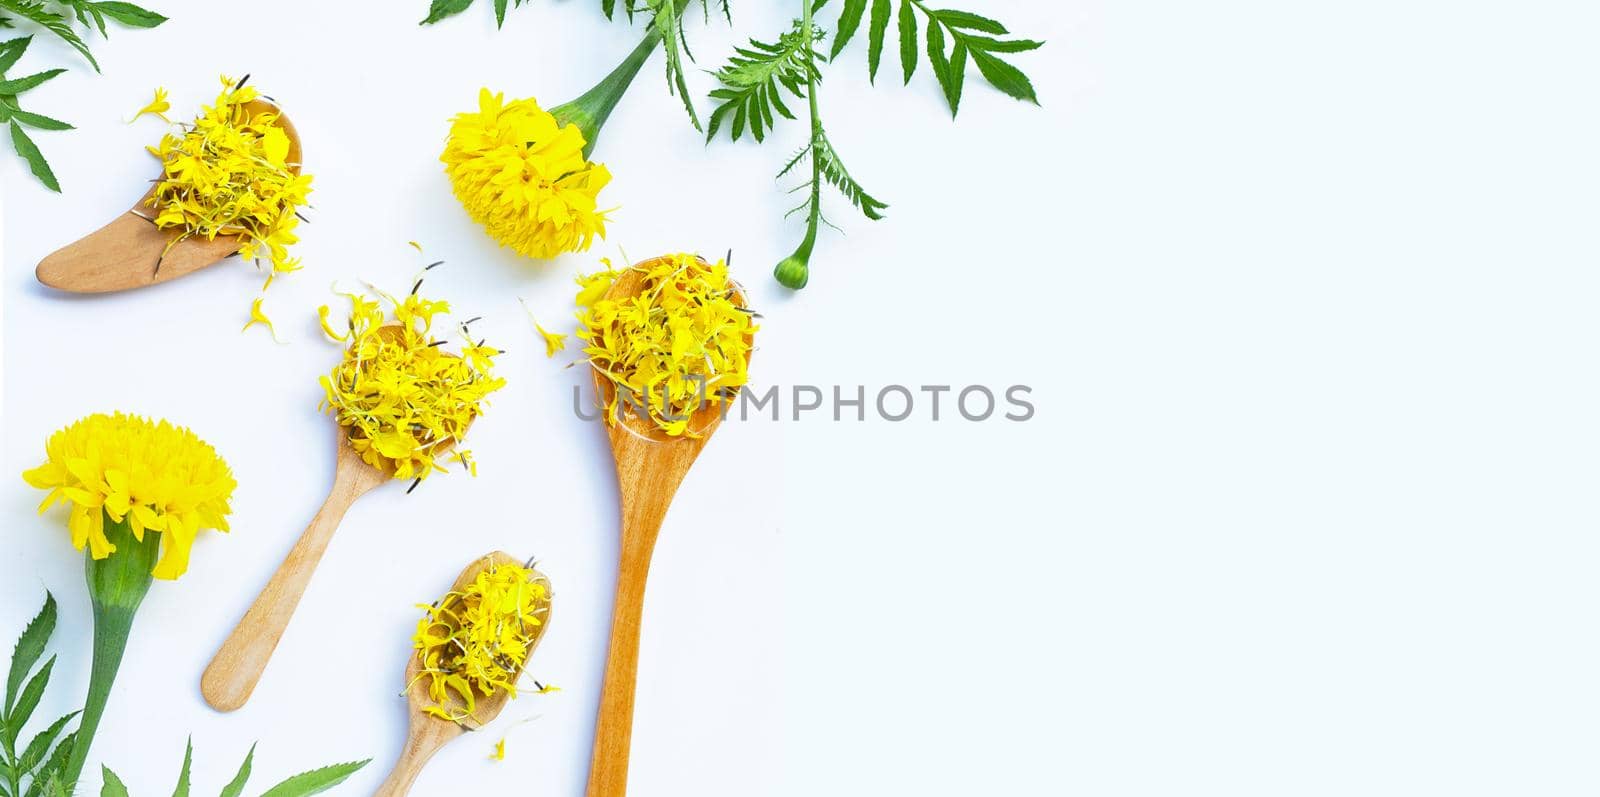 Marigold flower on white background. Copy space